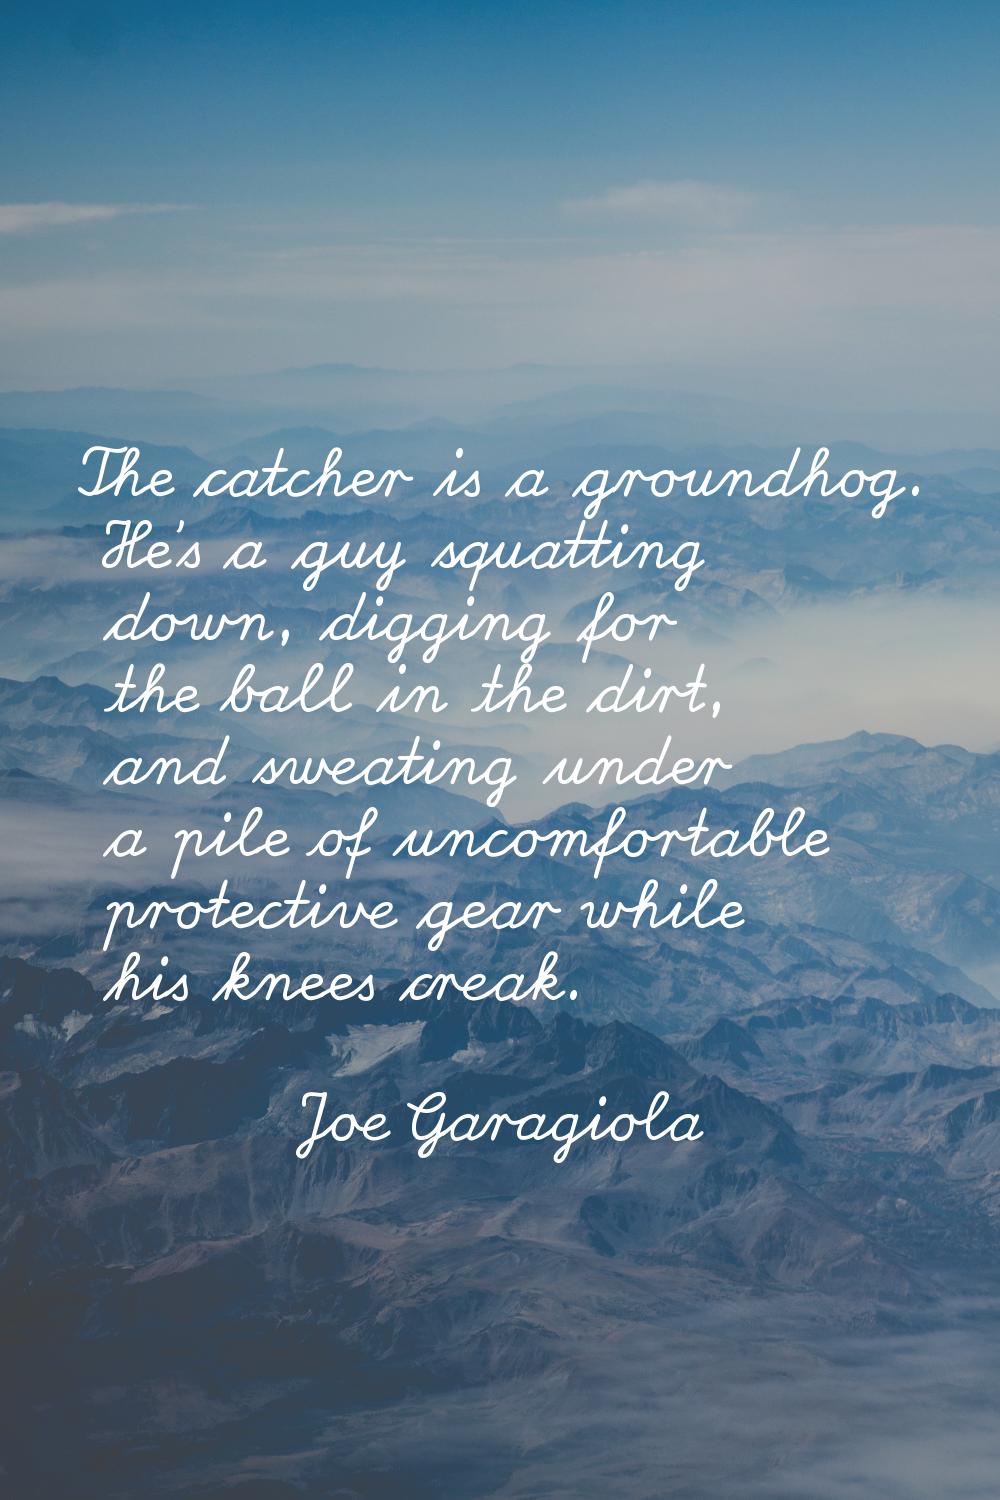 The catcher is a groundhog. He's a guy squatting down, digging for the ball in the dirt, and sweati